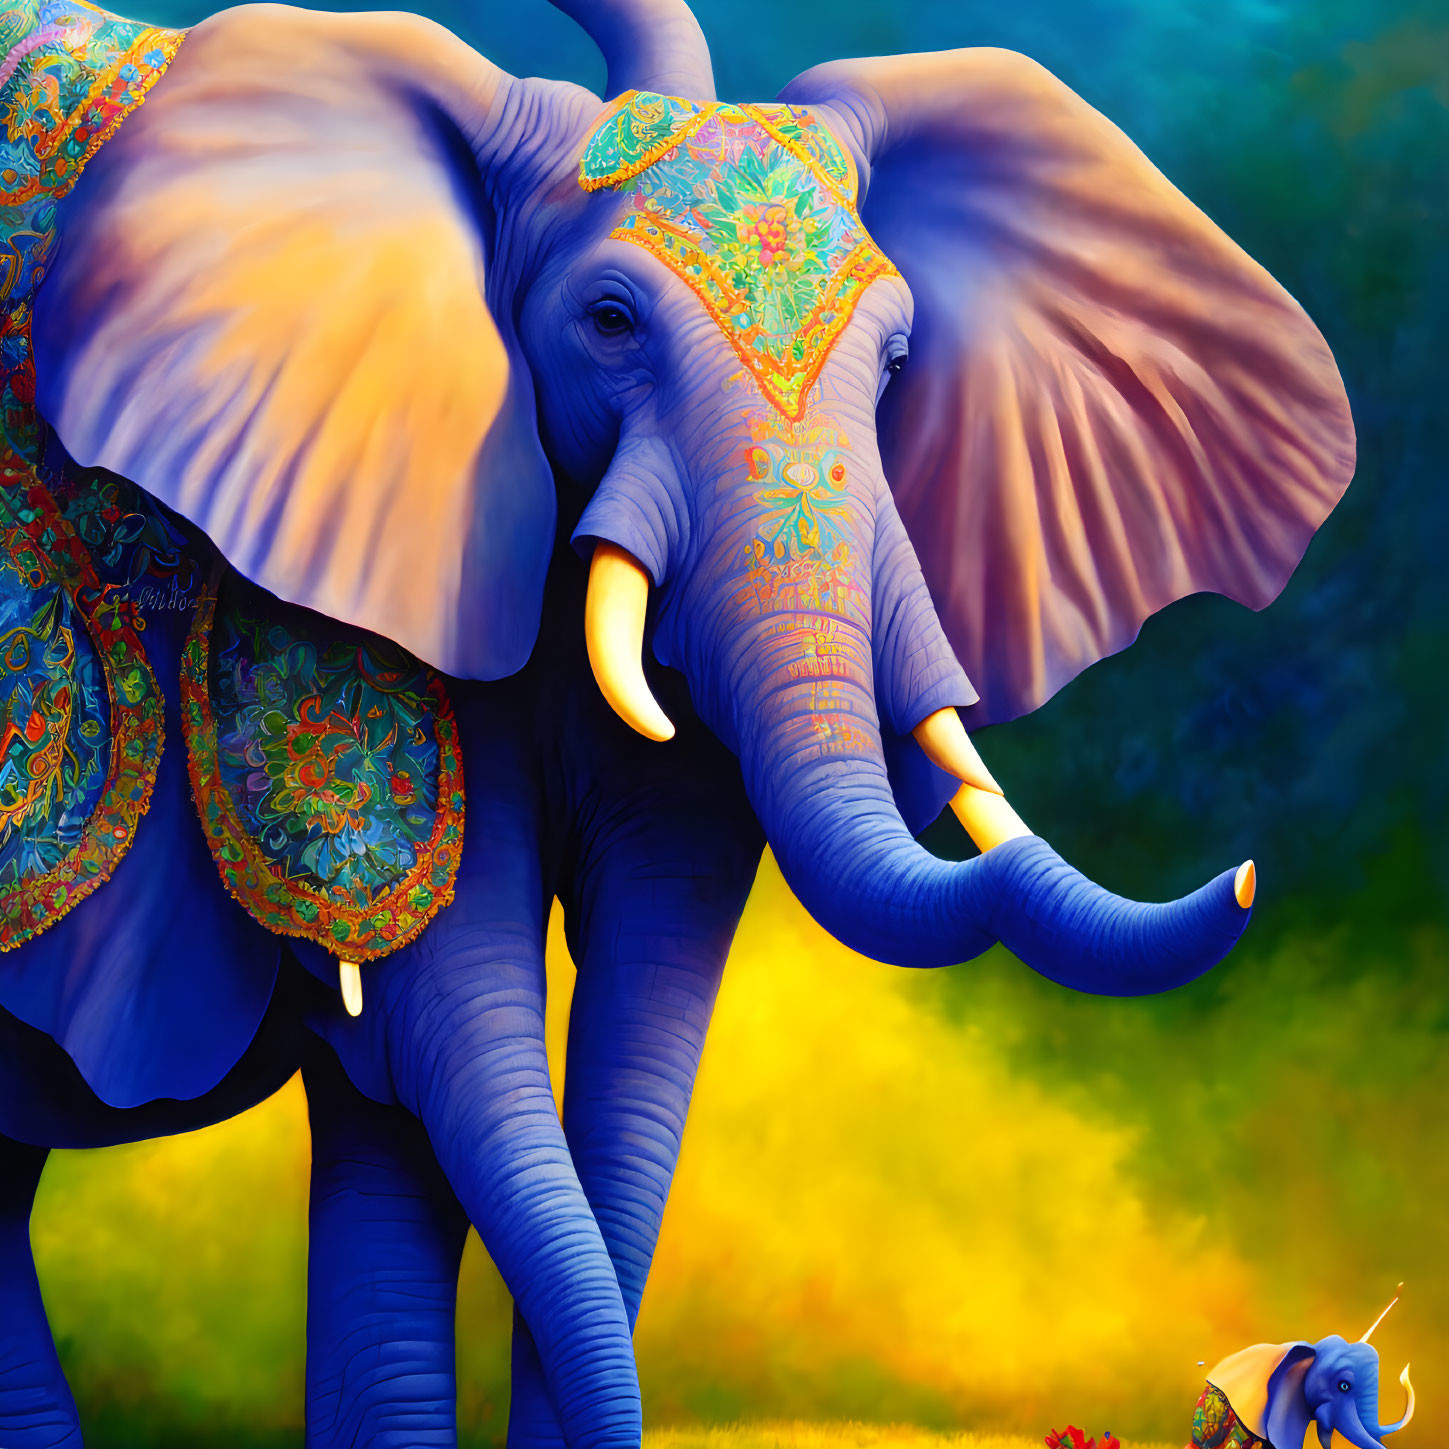 Colorful digital artwork of a blue elephant with ornate patterns on ears and back